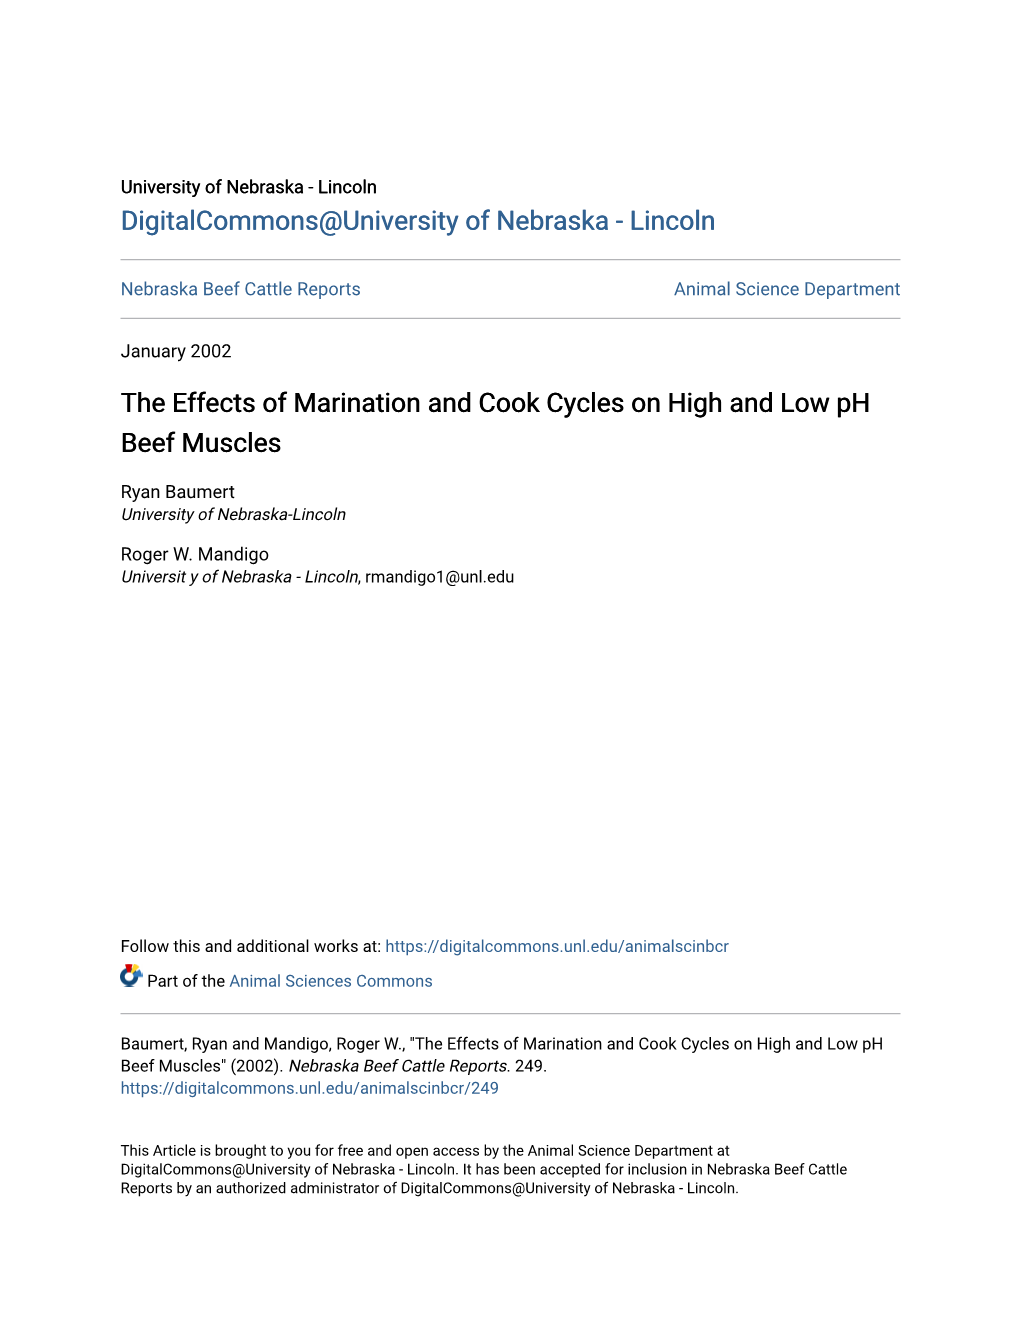 The Effects of Marination and Cook Cycles on High and Low Ph Beef Muscles